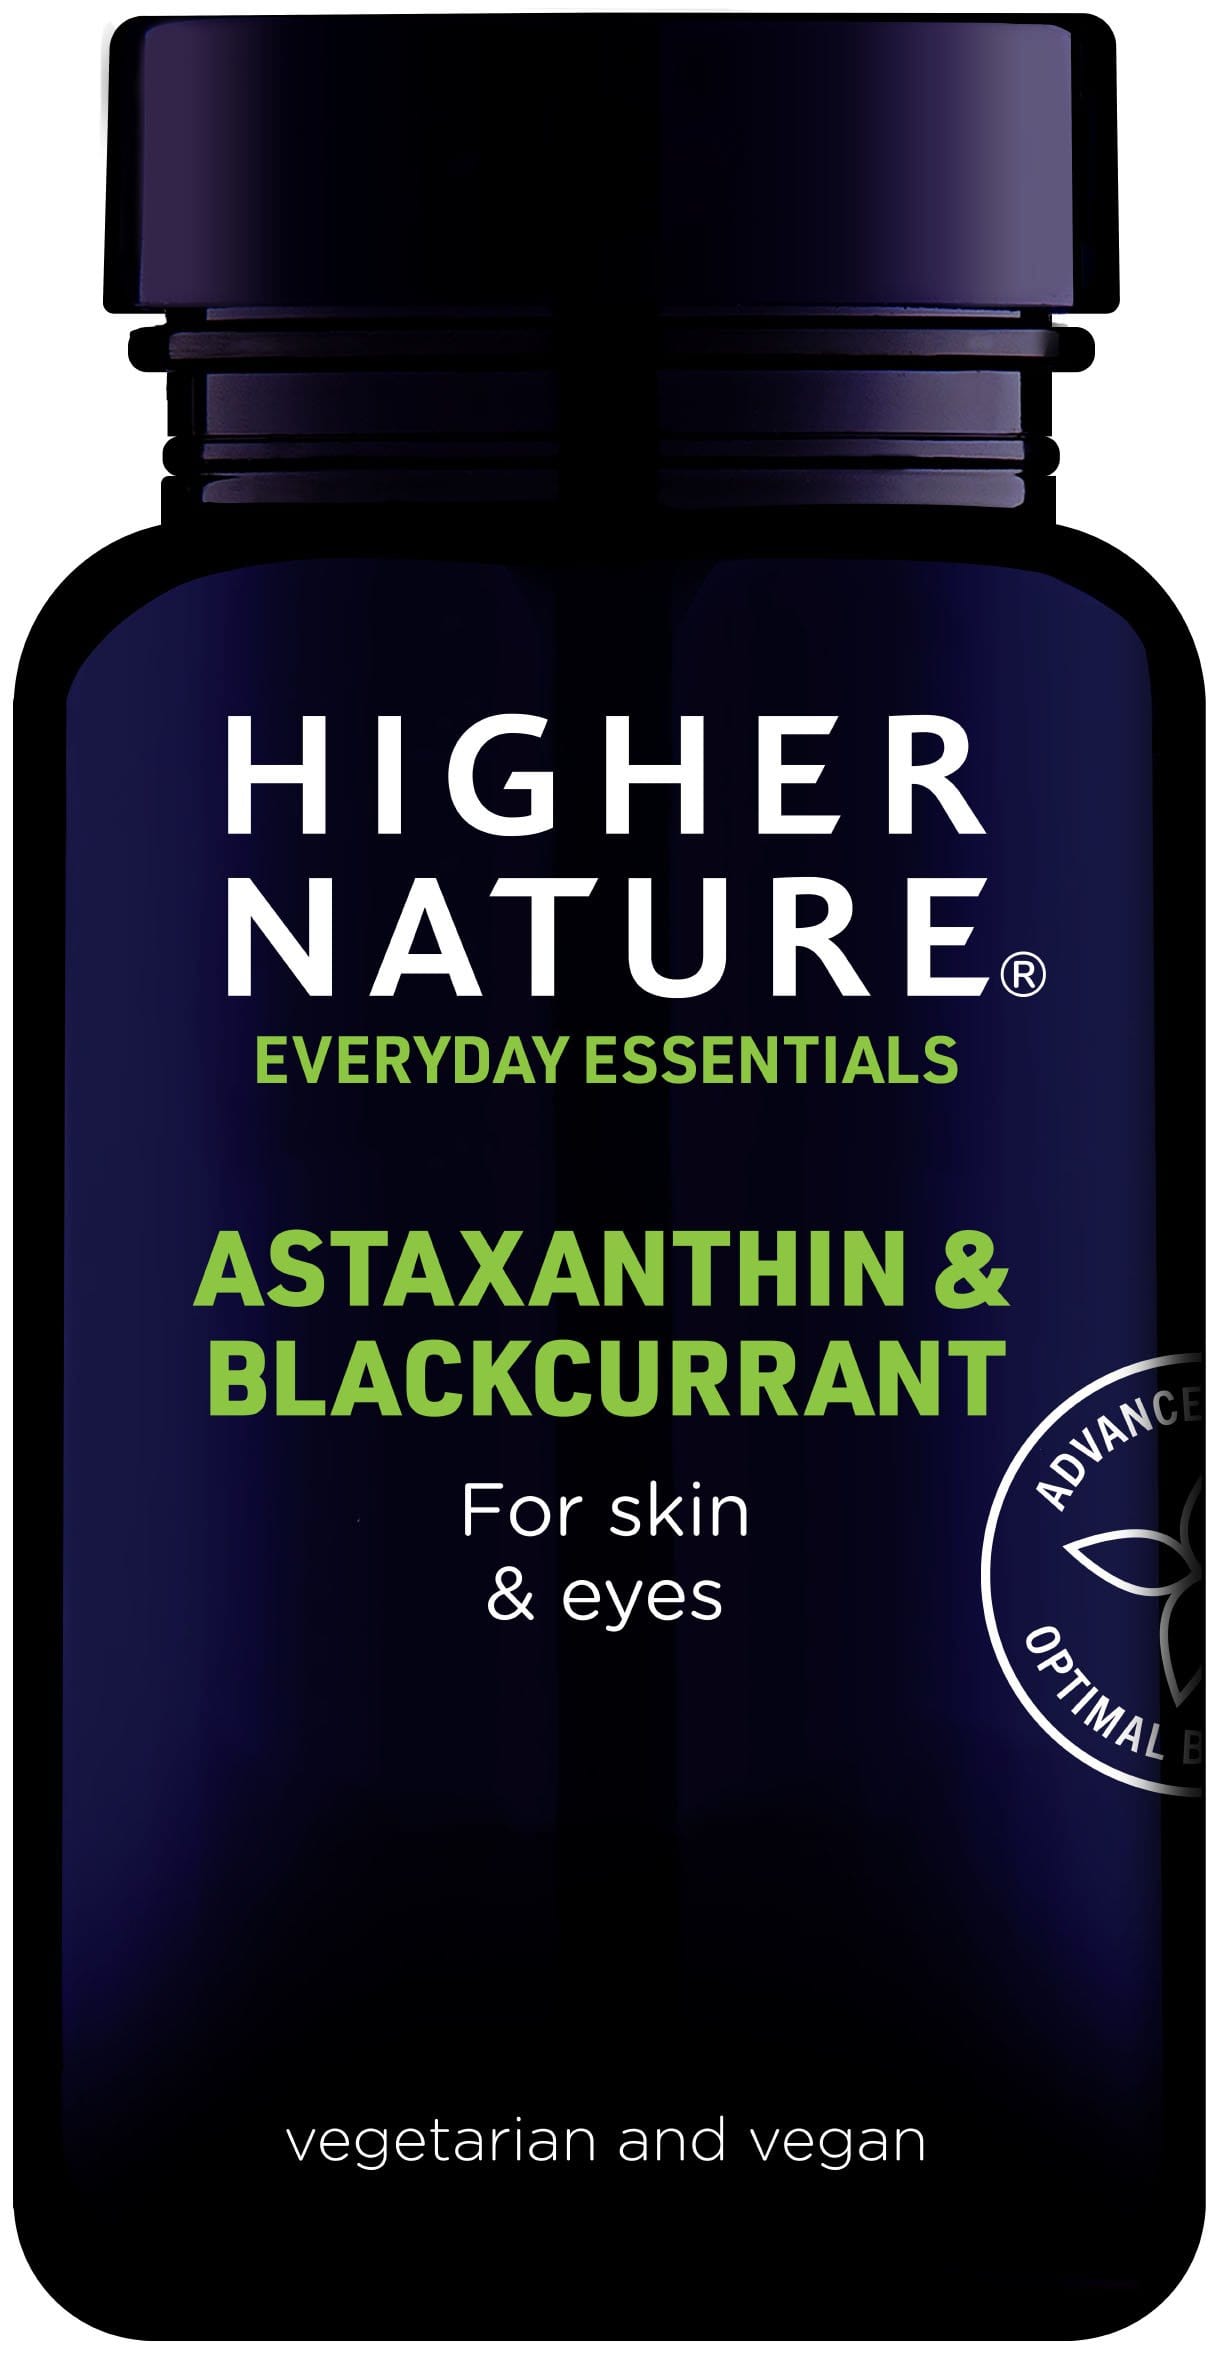 Higher Nature Astaxanthin & Blackcurrant, 90 VCapsules